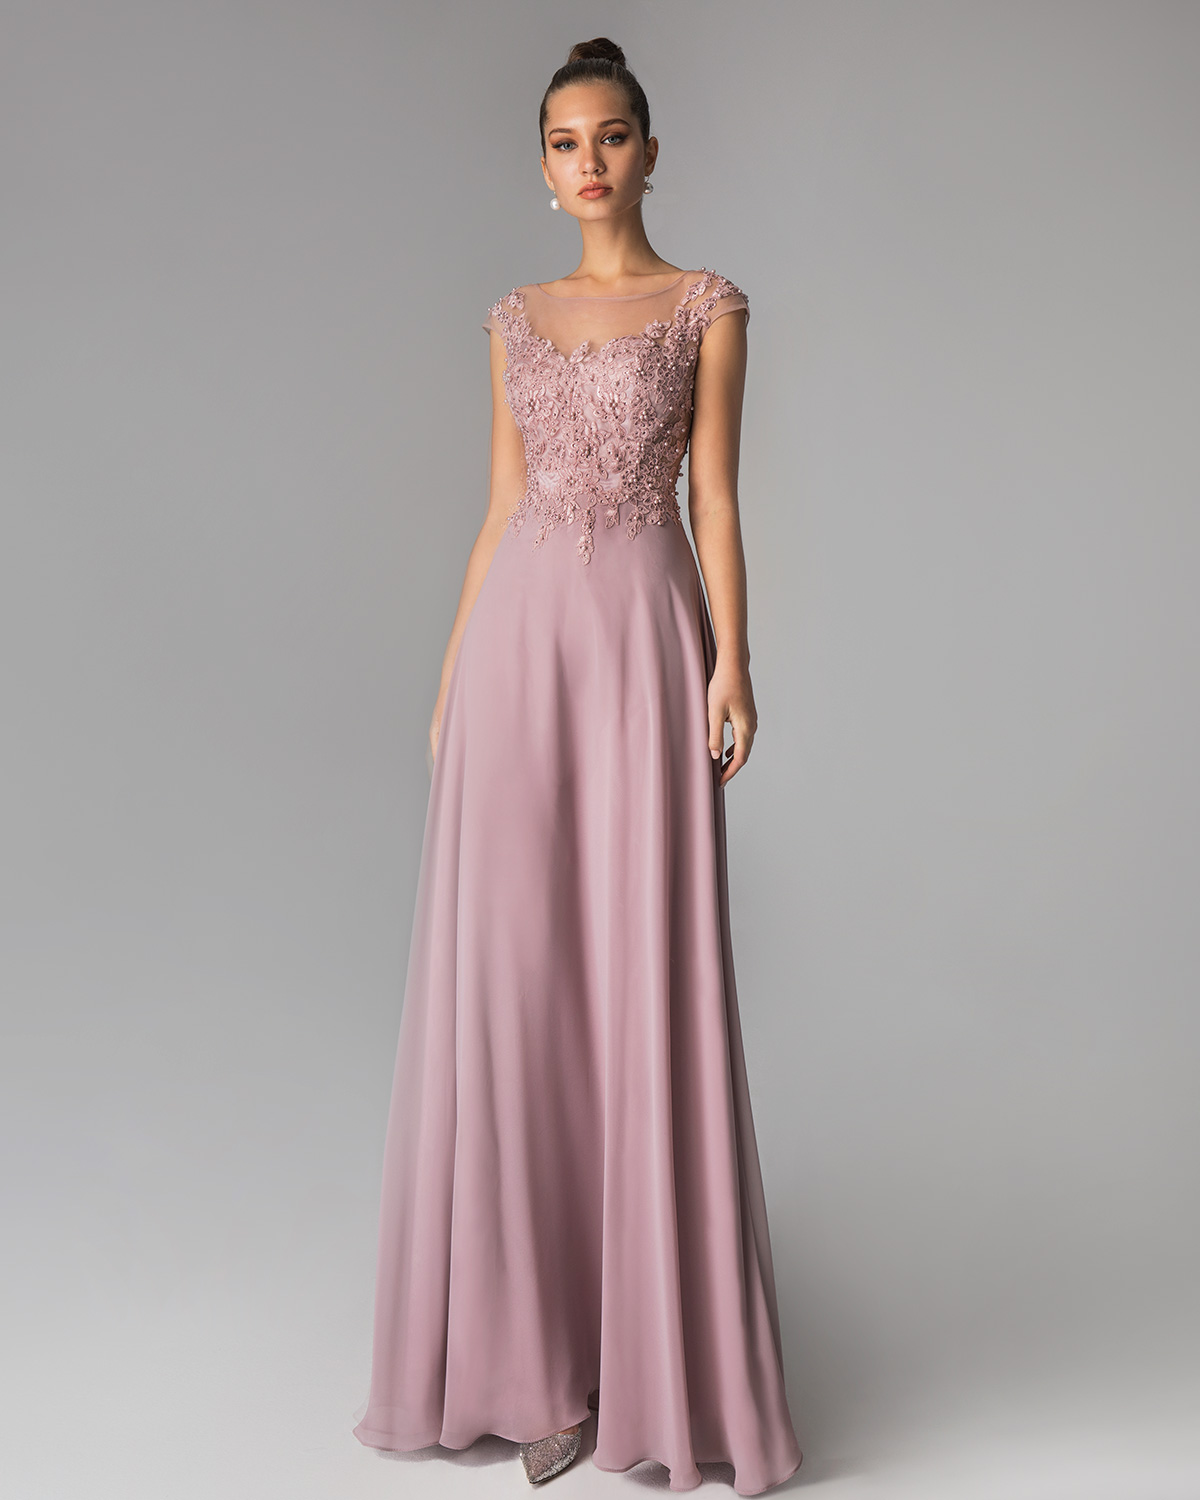 Classic Dresses / Long evening dress with lace top and chiffon skirt